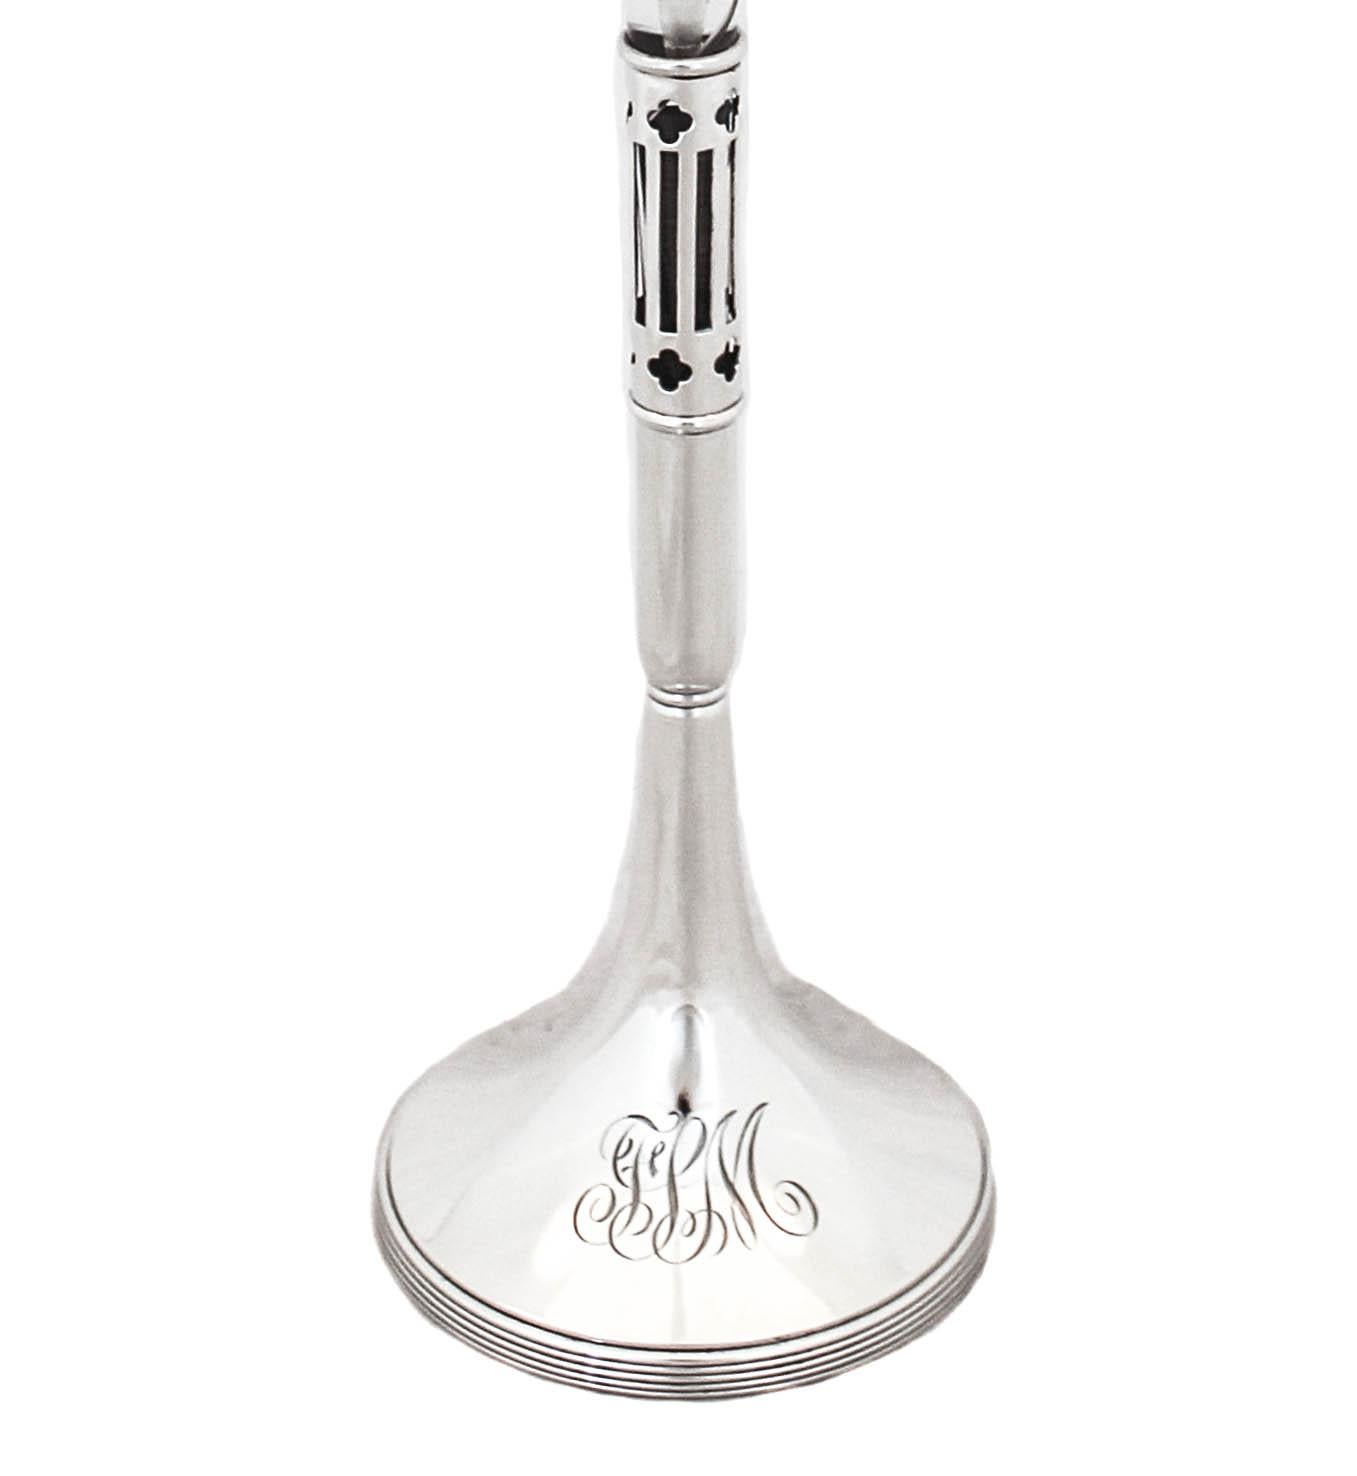 Being offered is a sterling silver bud vase by the William Durgin Silver Company. It has a silver base with a crystal liner that can be removed from the base. The top of the liner is scalloped and looks like a flower. Along the neck, there is an